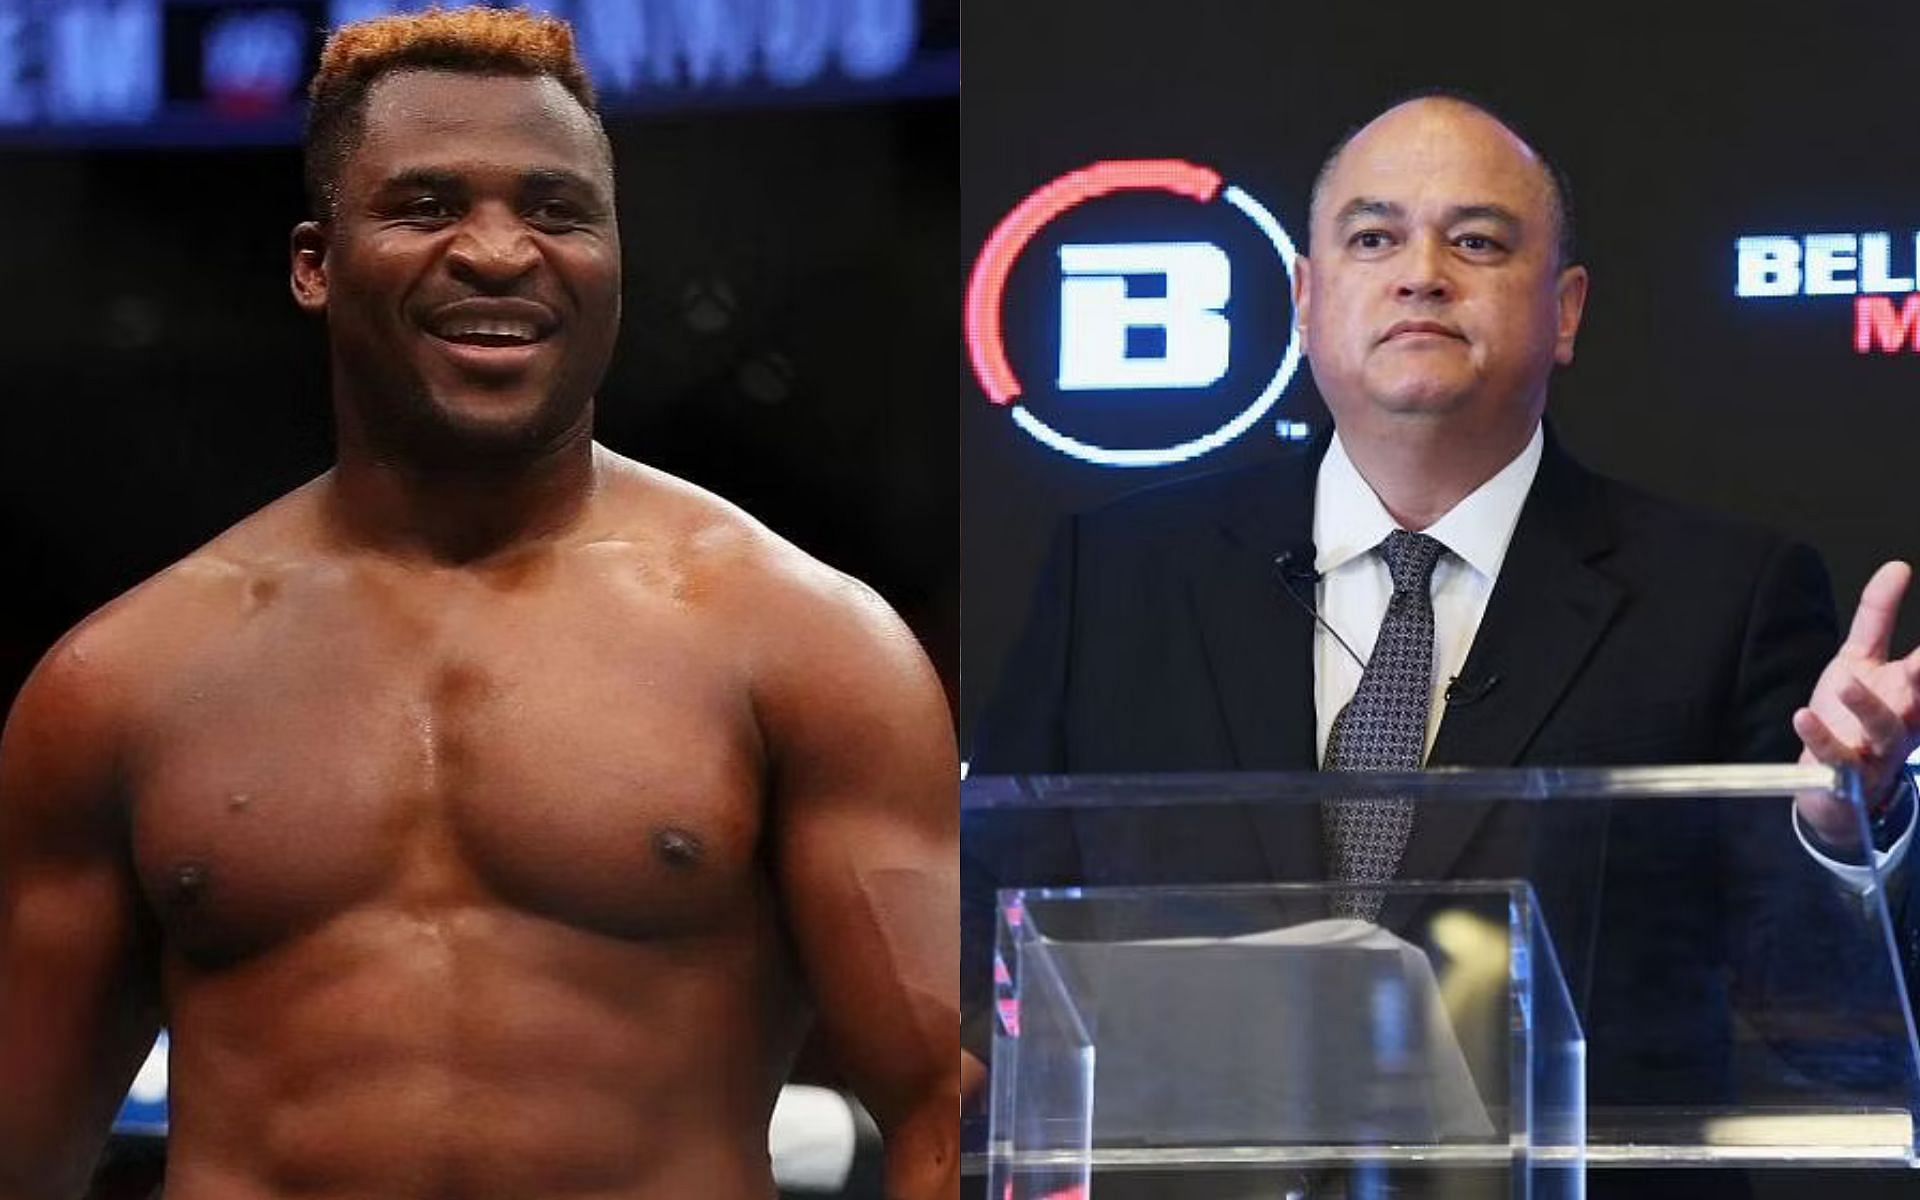 Will we see Francis Ngannou fighting under the Bellator banner?